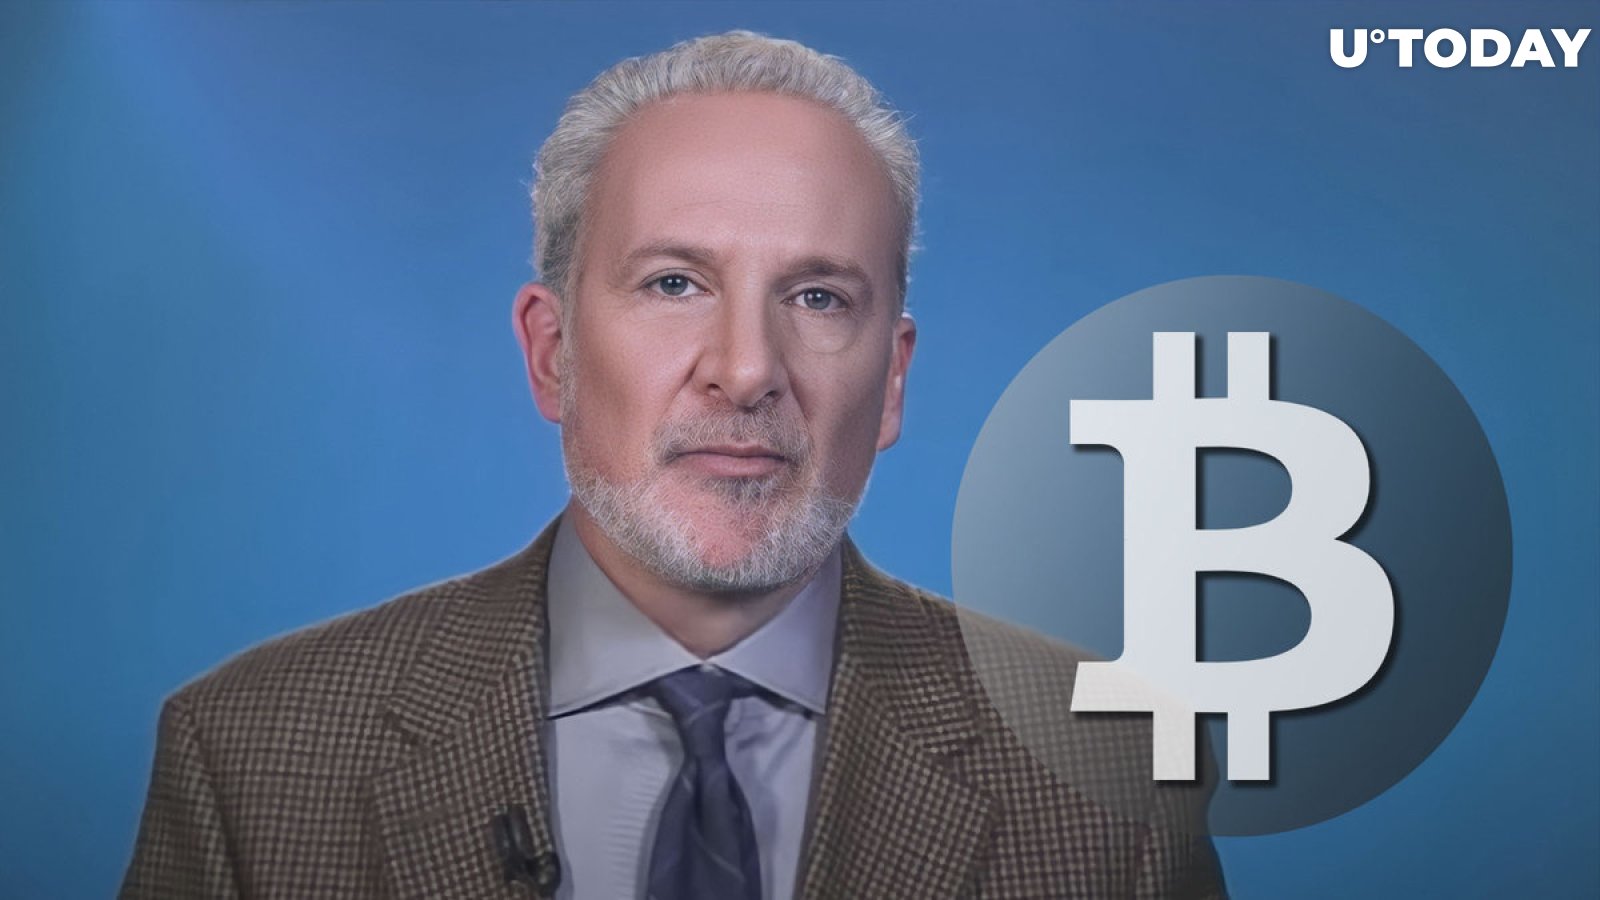 Peter Schiff has an important warning for Bitcoin ETF buyers